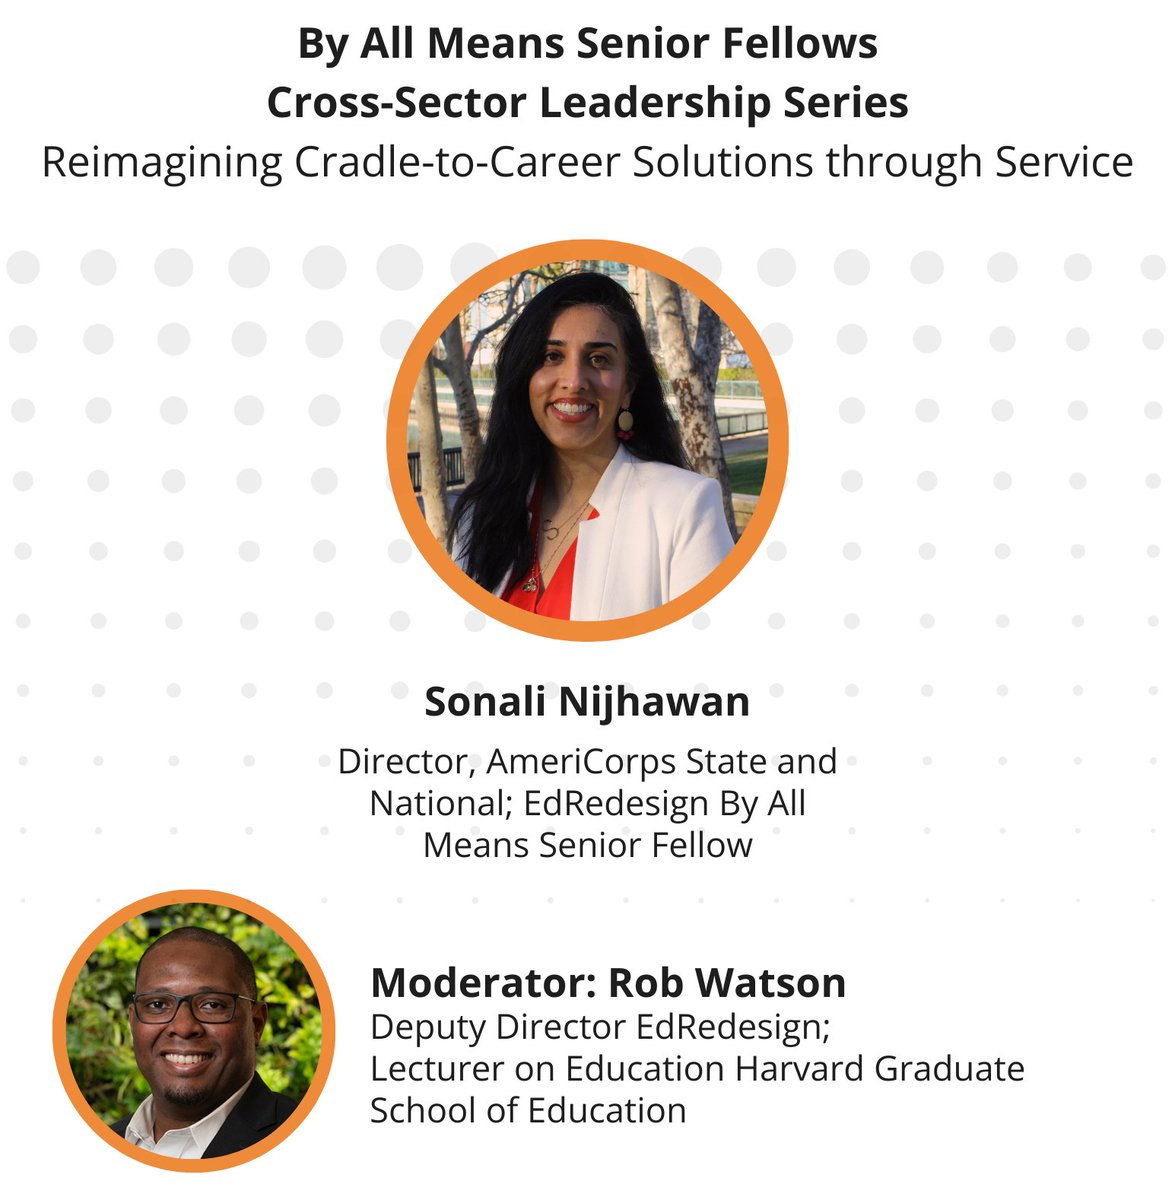 Join us 5/14 @ 3:30pm EST for a discussion w/ @AmeriCorps Sonali Nijhawan on the role of national service as a cross-cutting strategy to advance #cradletocareer #placebased solutions for youth & families: lnkd.in/dzvvKsbi @hgse @Harvard